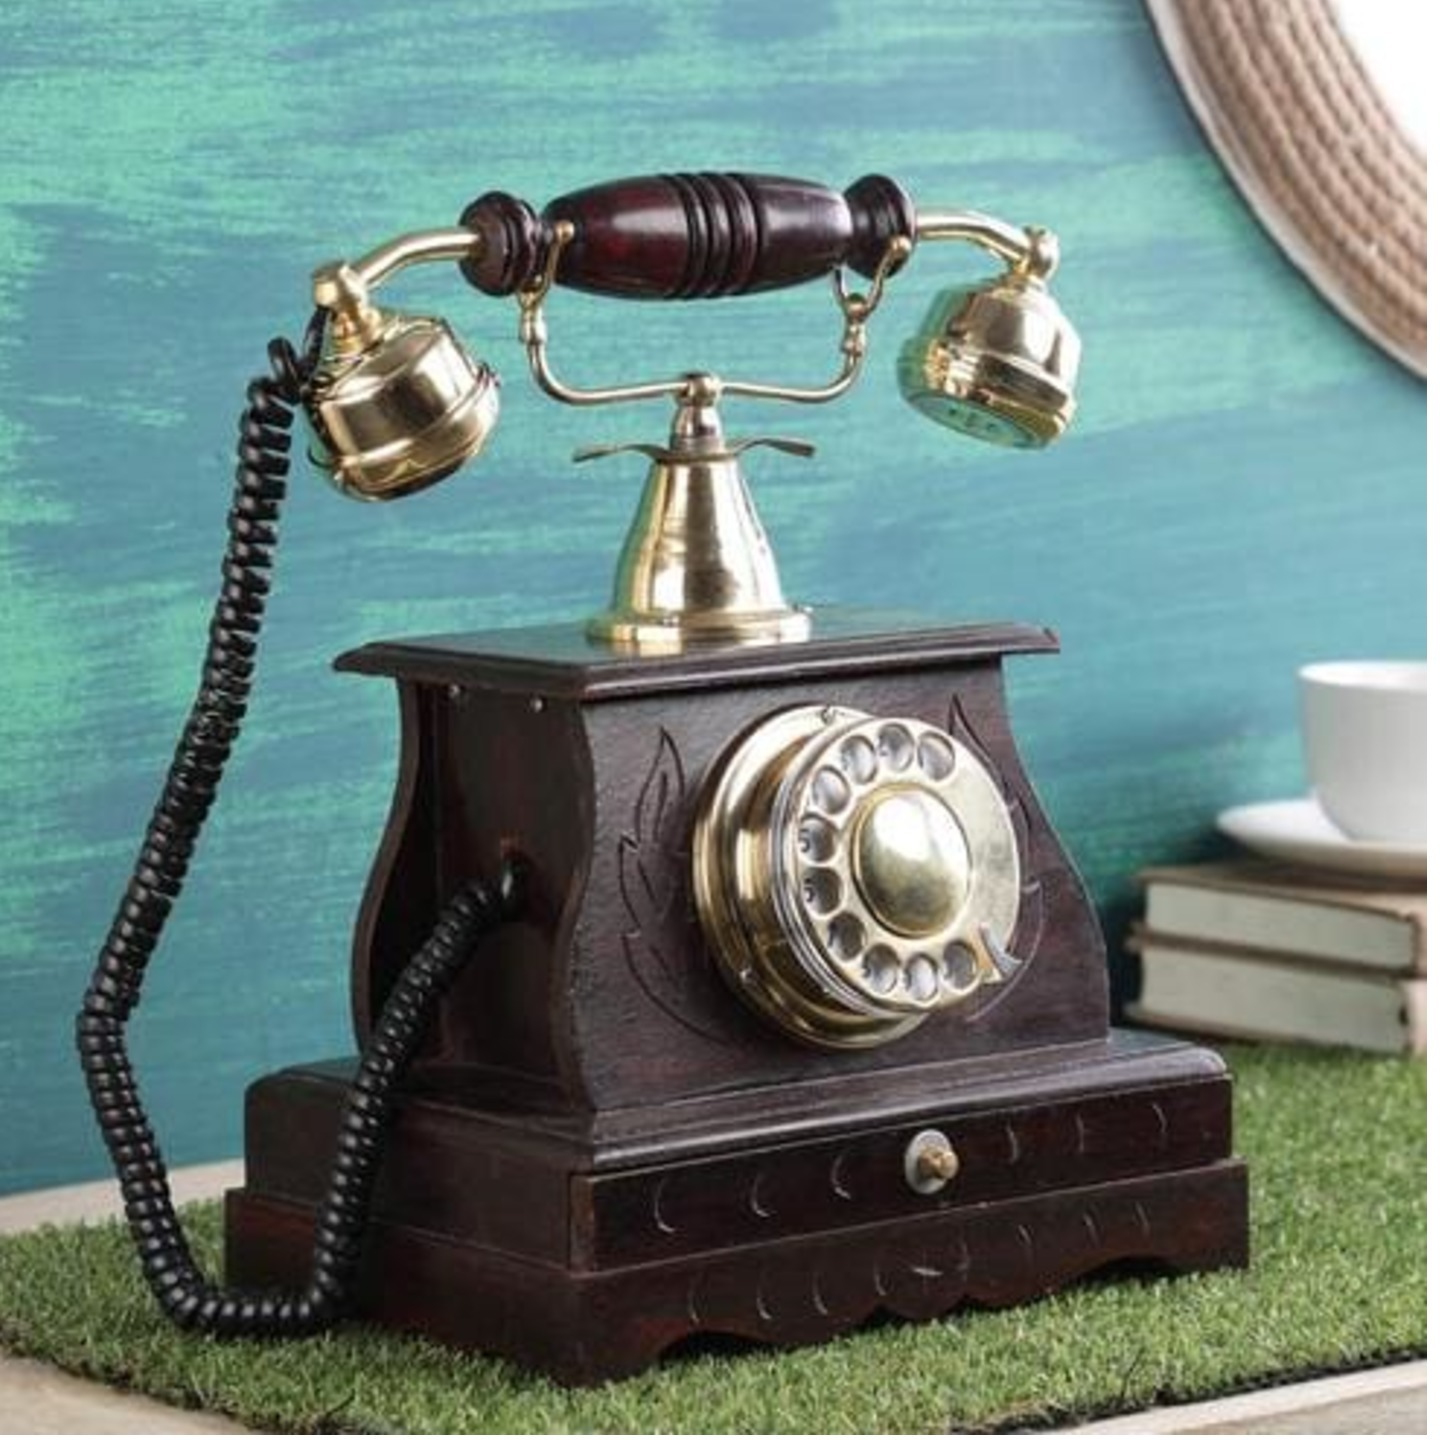 Retro, Vintage, Rotary, Old Time, Antique working Telephone